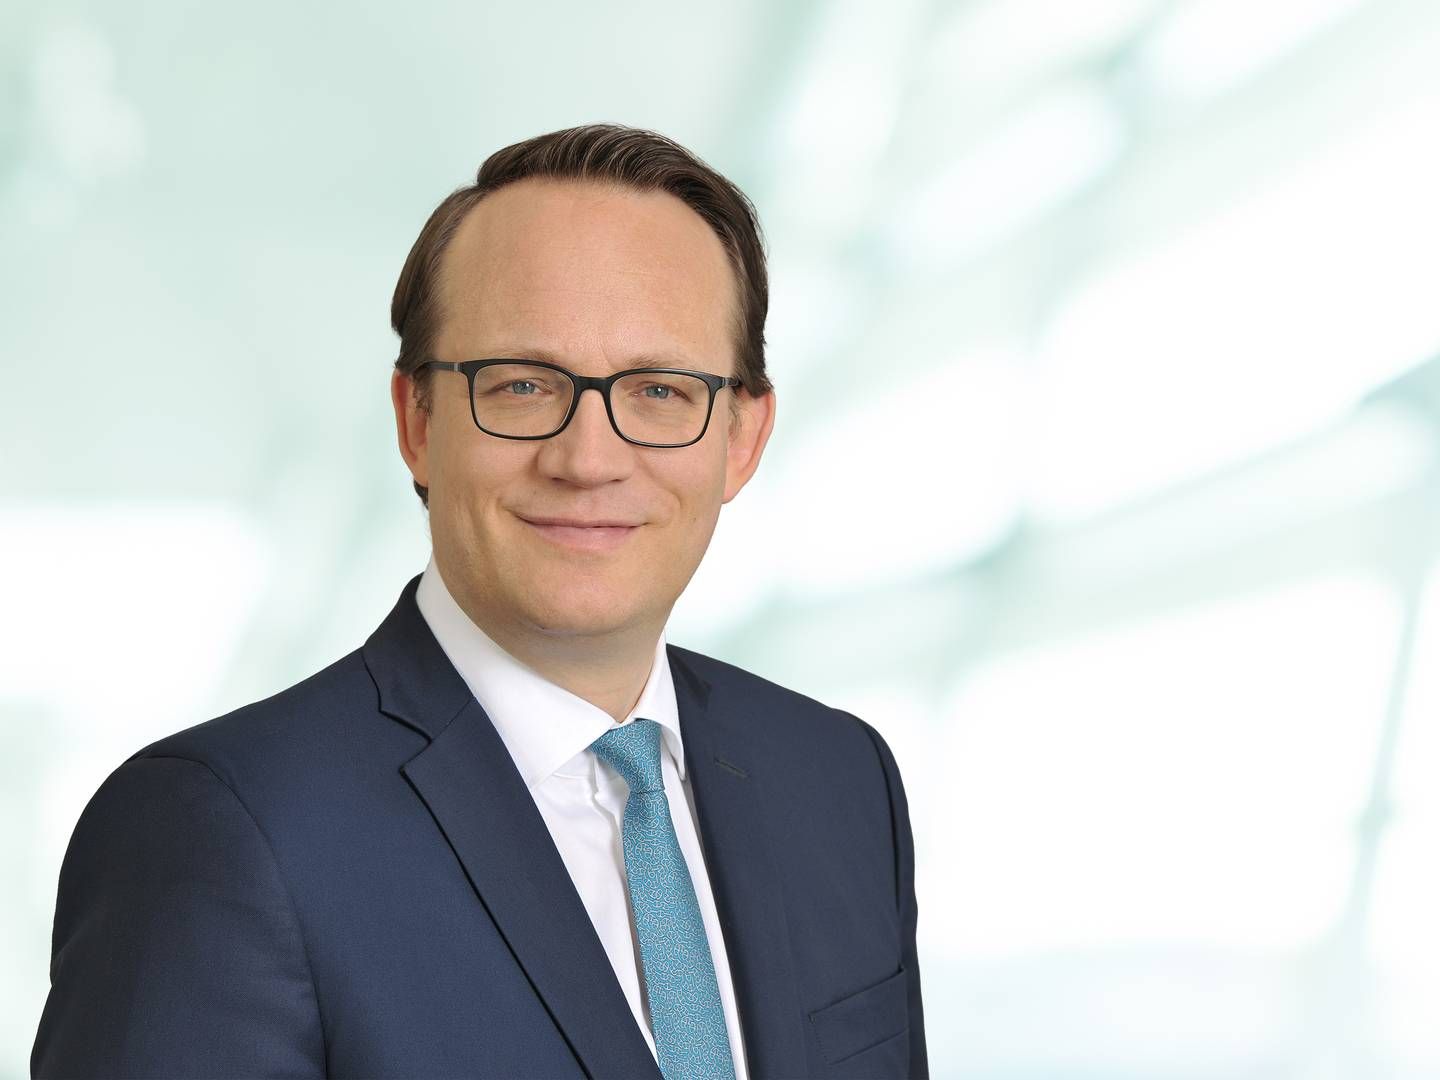 RWE's CEO, Markus Krebber, told the Financial Times that RWE is among the developers that decided not to bid for the contracts. This happened despite the fact that the company won a number of contracts for onshore wind projects and solar energy in the same tender round. | Foto: Rwe